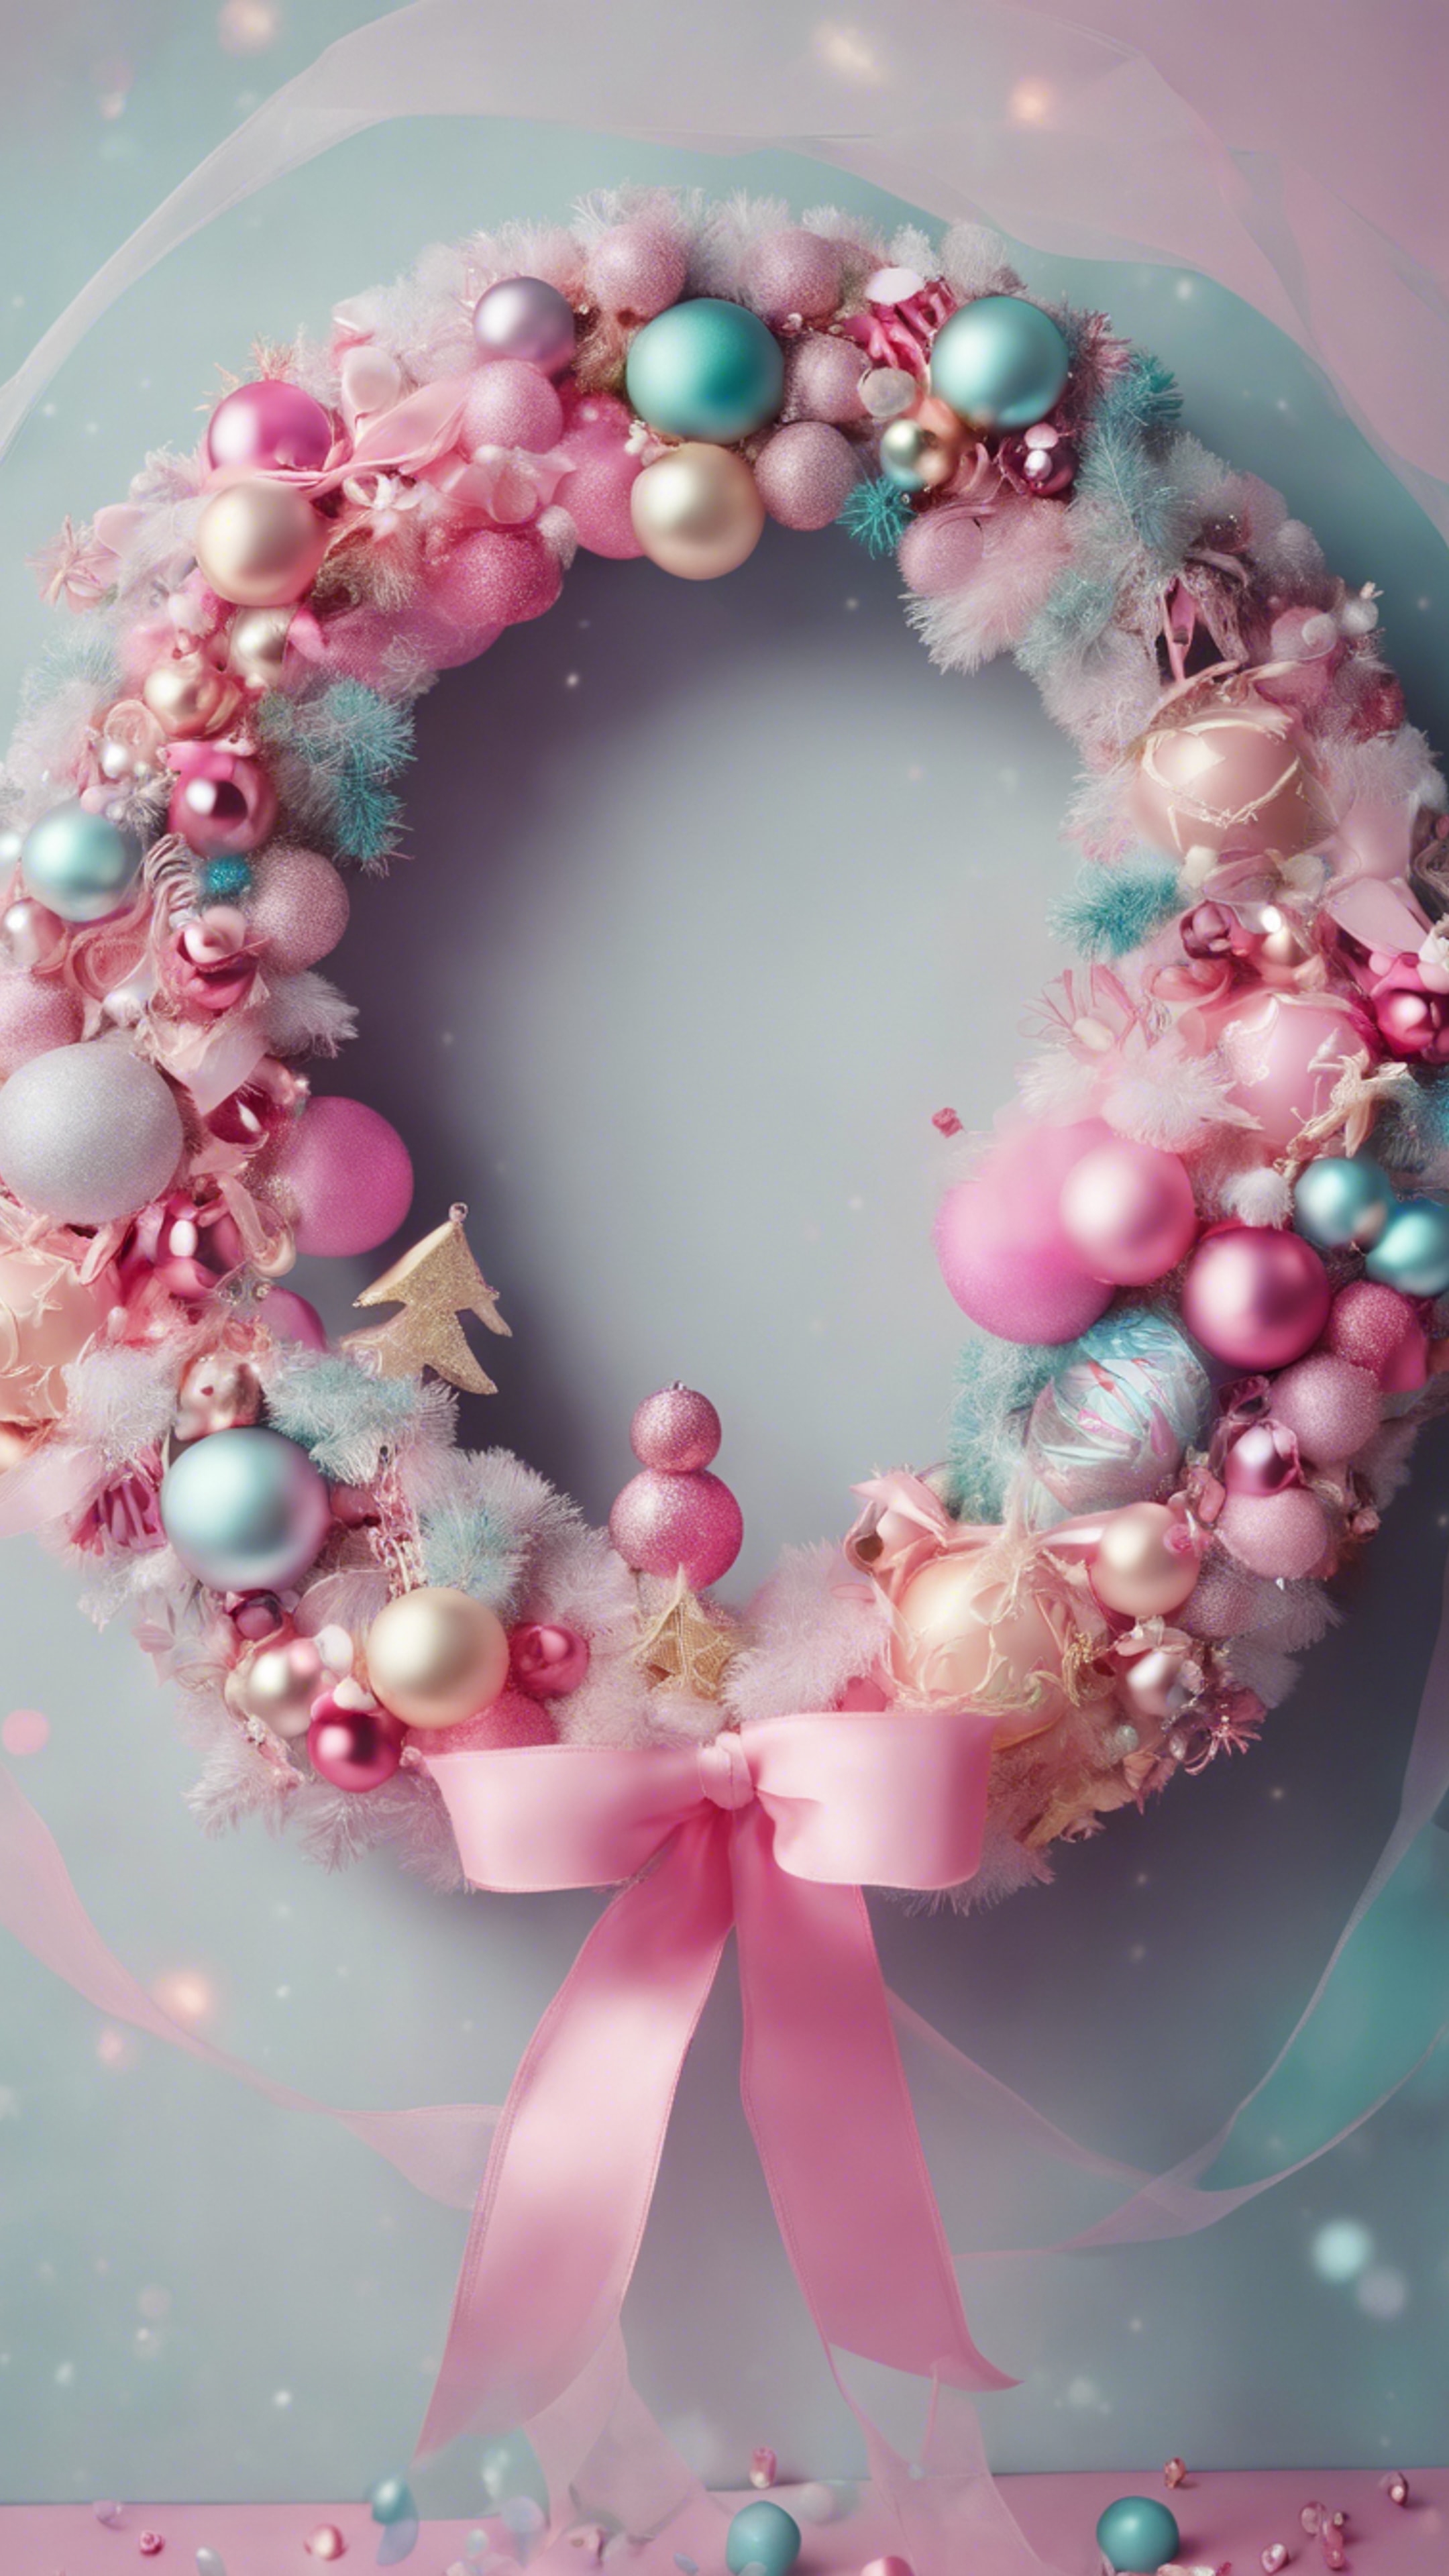 A Kawaii-inspired Christmas wreath adorned with bright pink and pastel ribbons and cute festive ornaments. Tapetai[4ef6f99b659d4f218ce6]